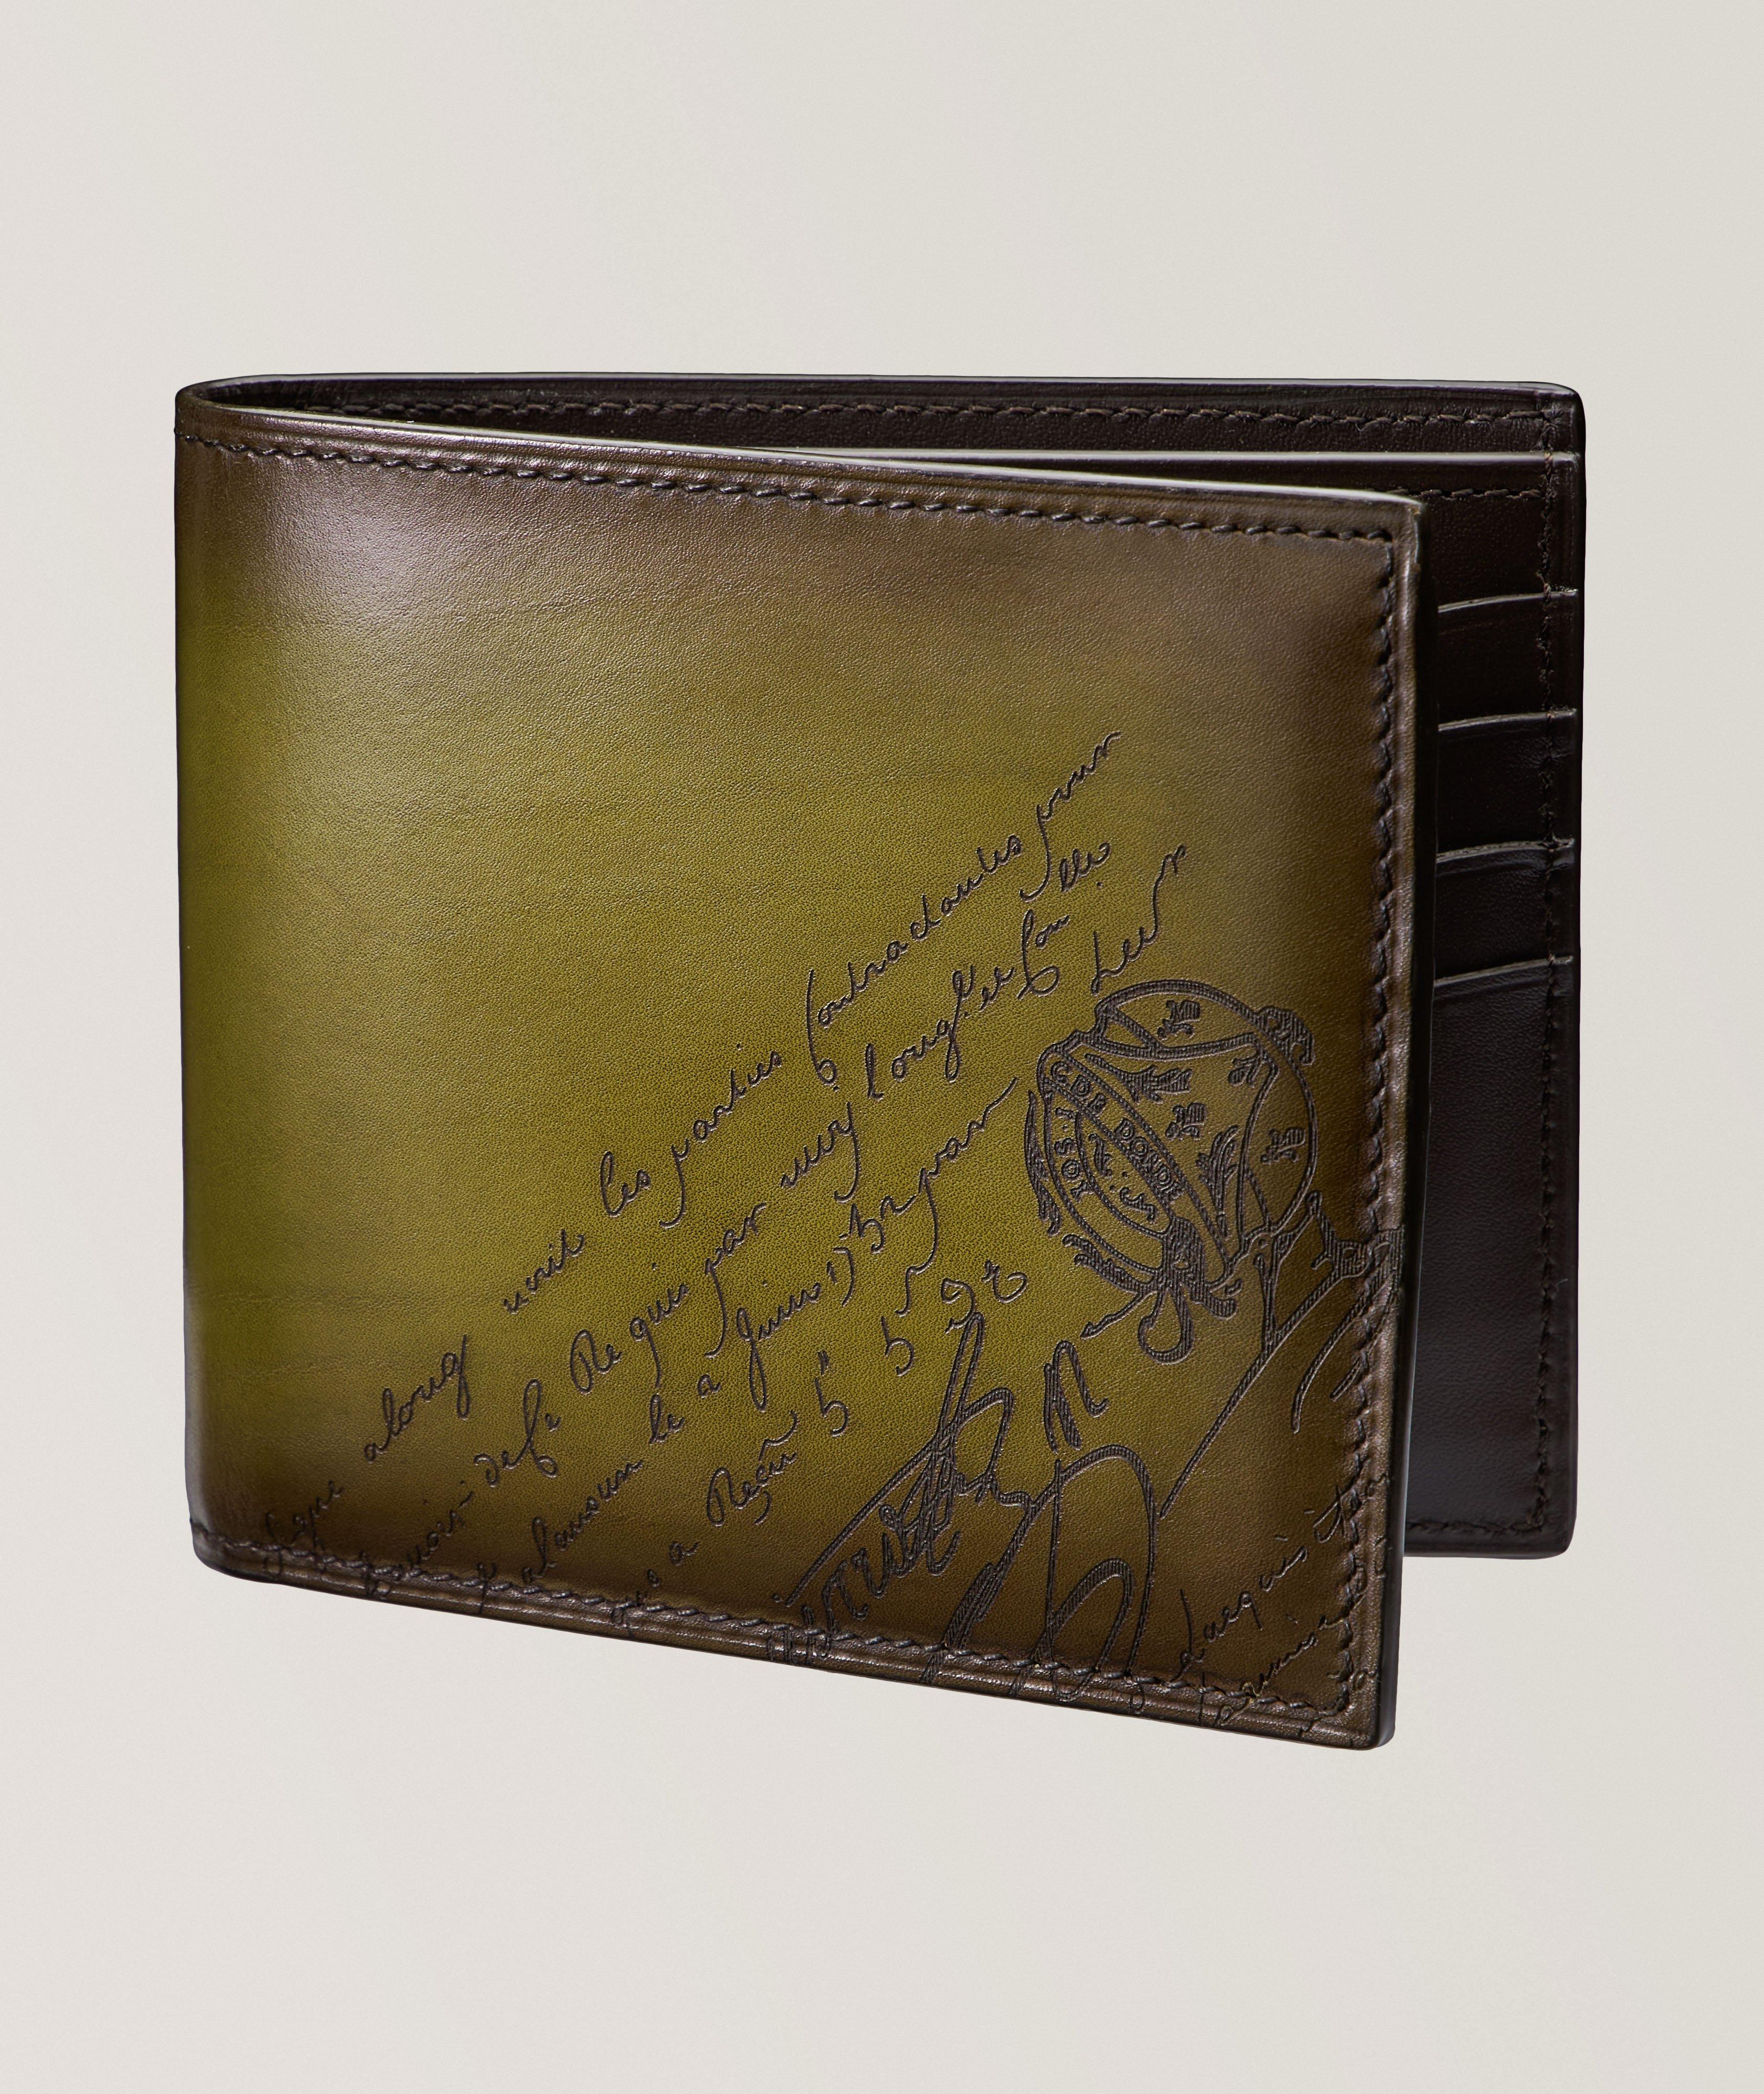 Makore Scritto Leather Bifold Wallet image 0